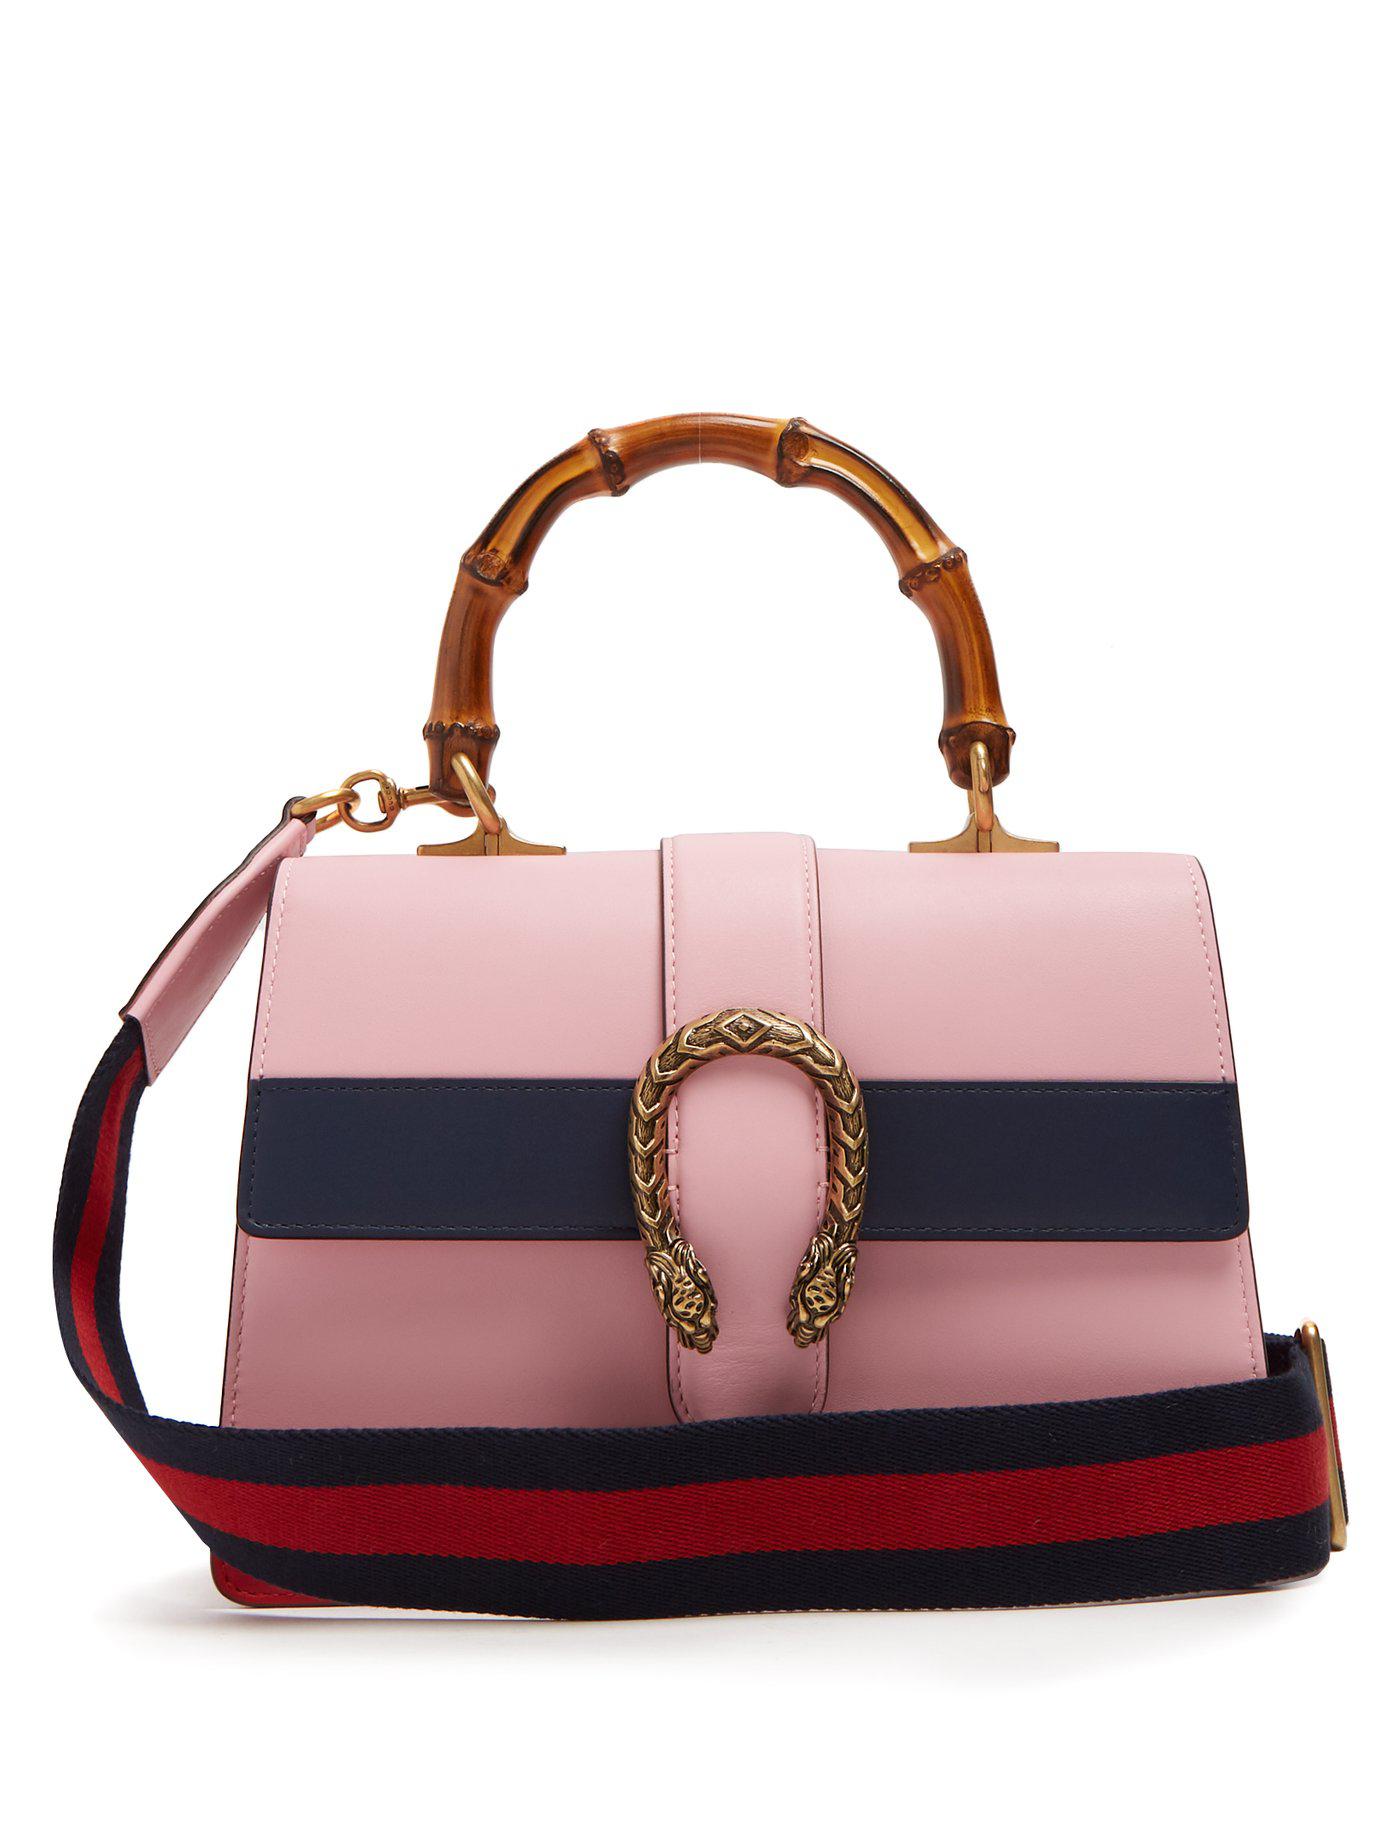 Gucci Dionysus Medium Bamboo Handle Leather Bag in Pink - Lyst